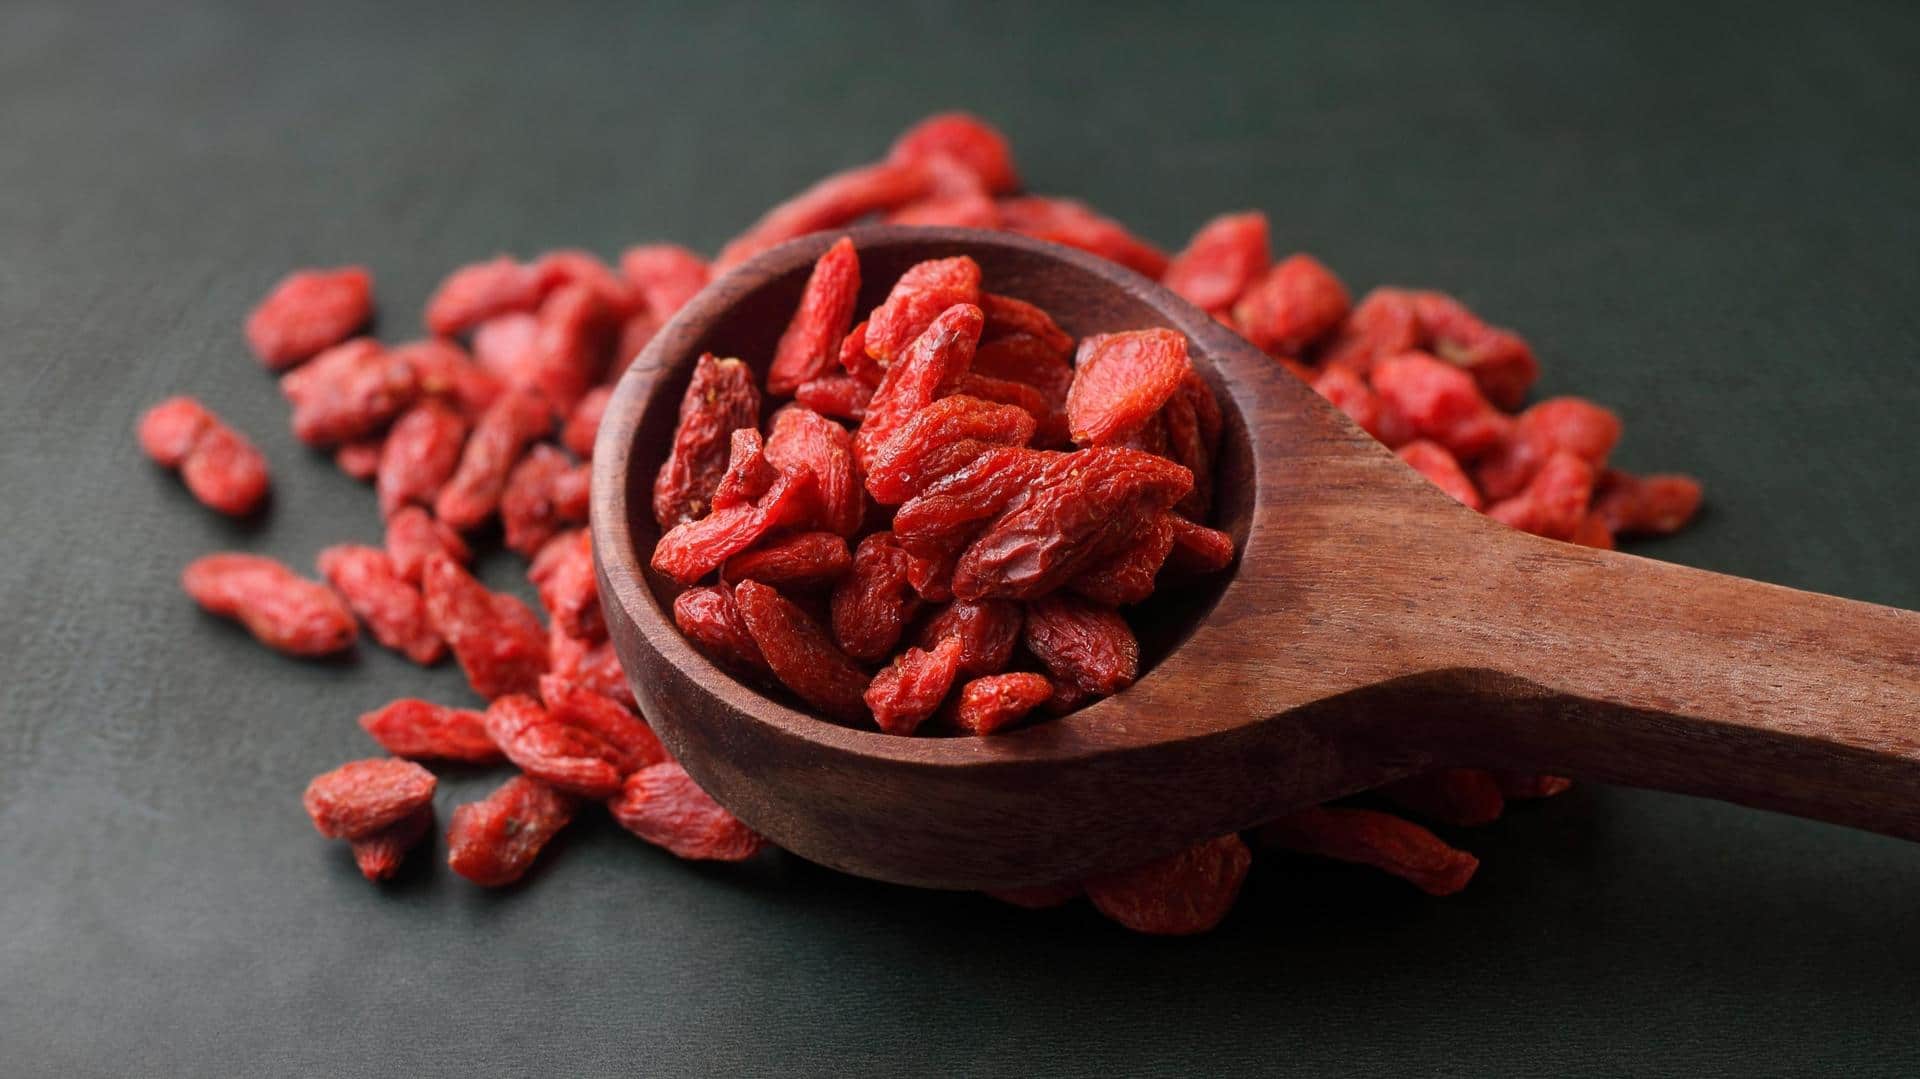 Have you heard of goji berries? Here are their benefits